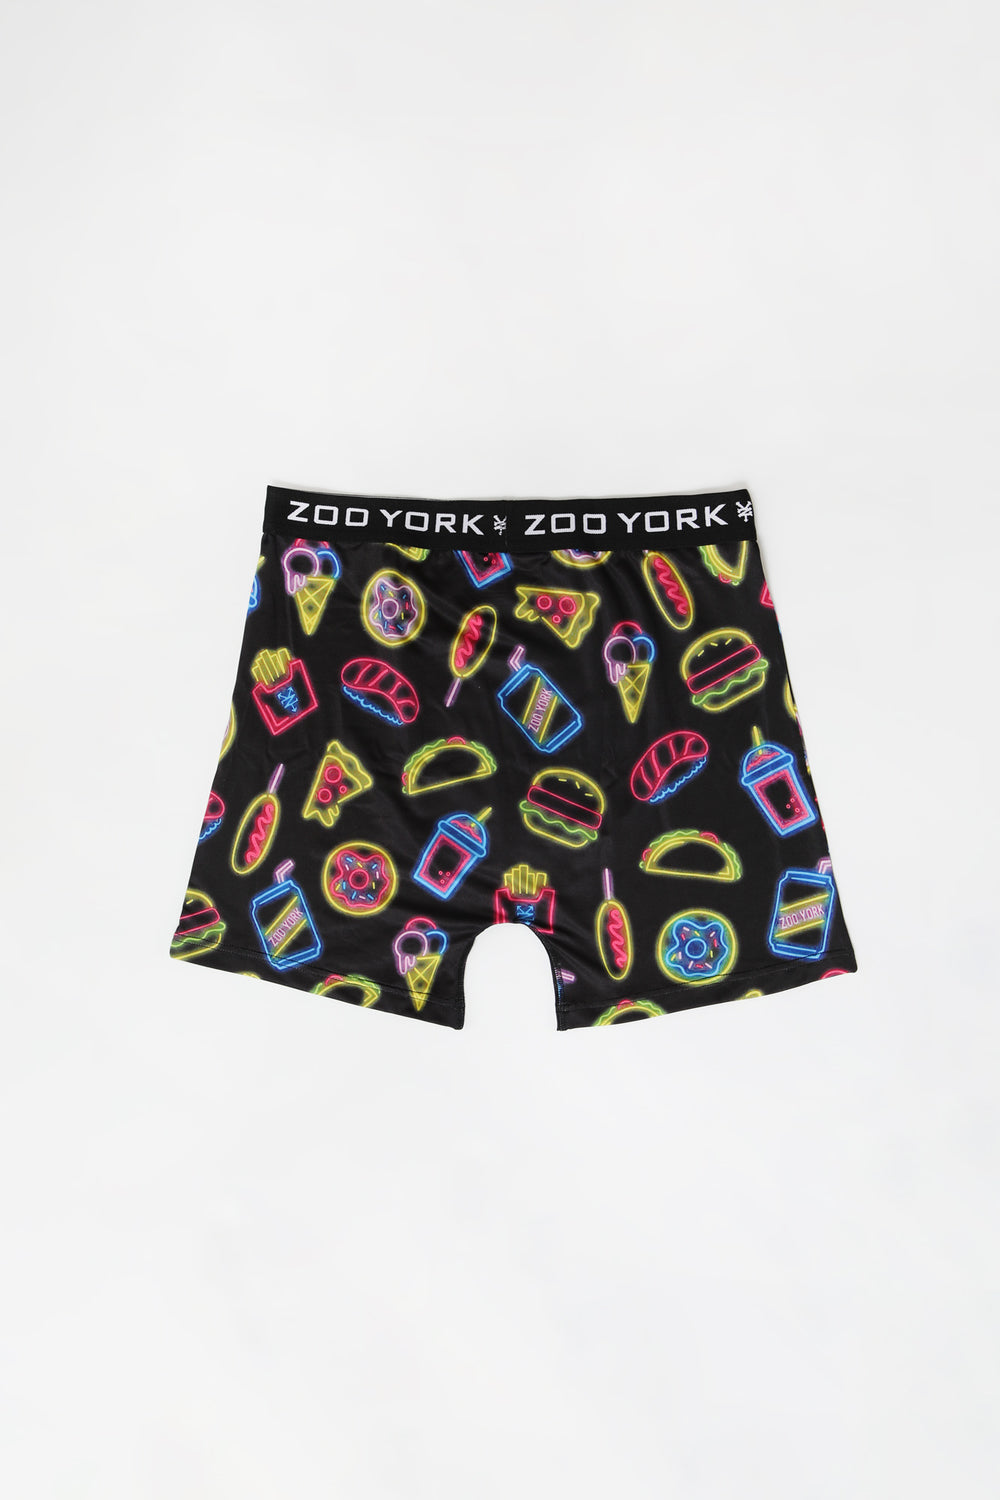 Zoo York Youth Neon Fast Food Boxer Brief Black